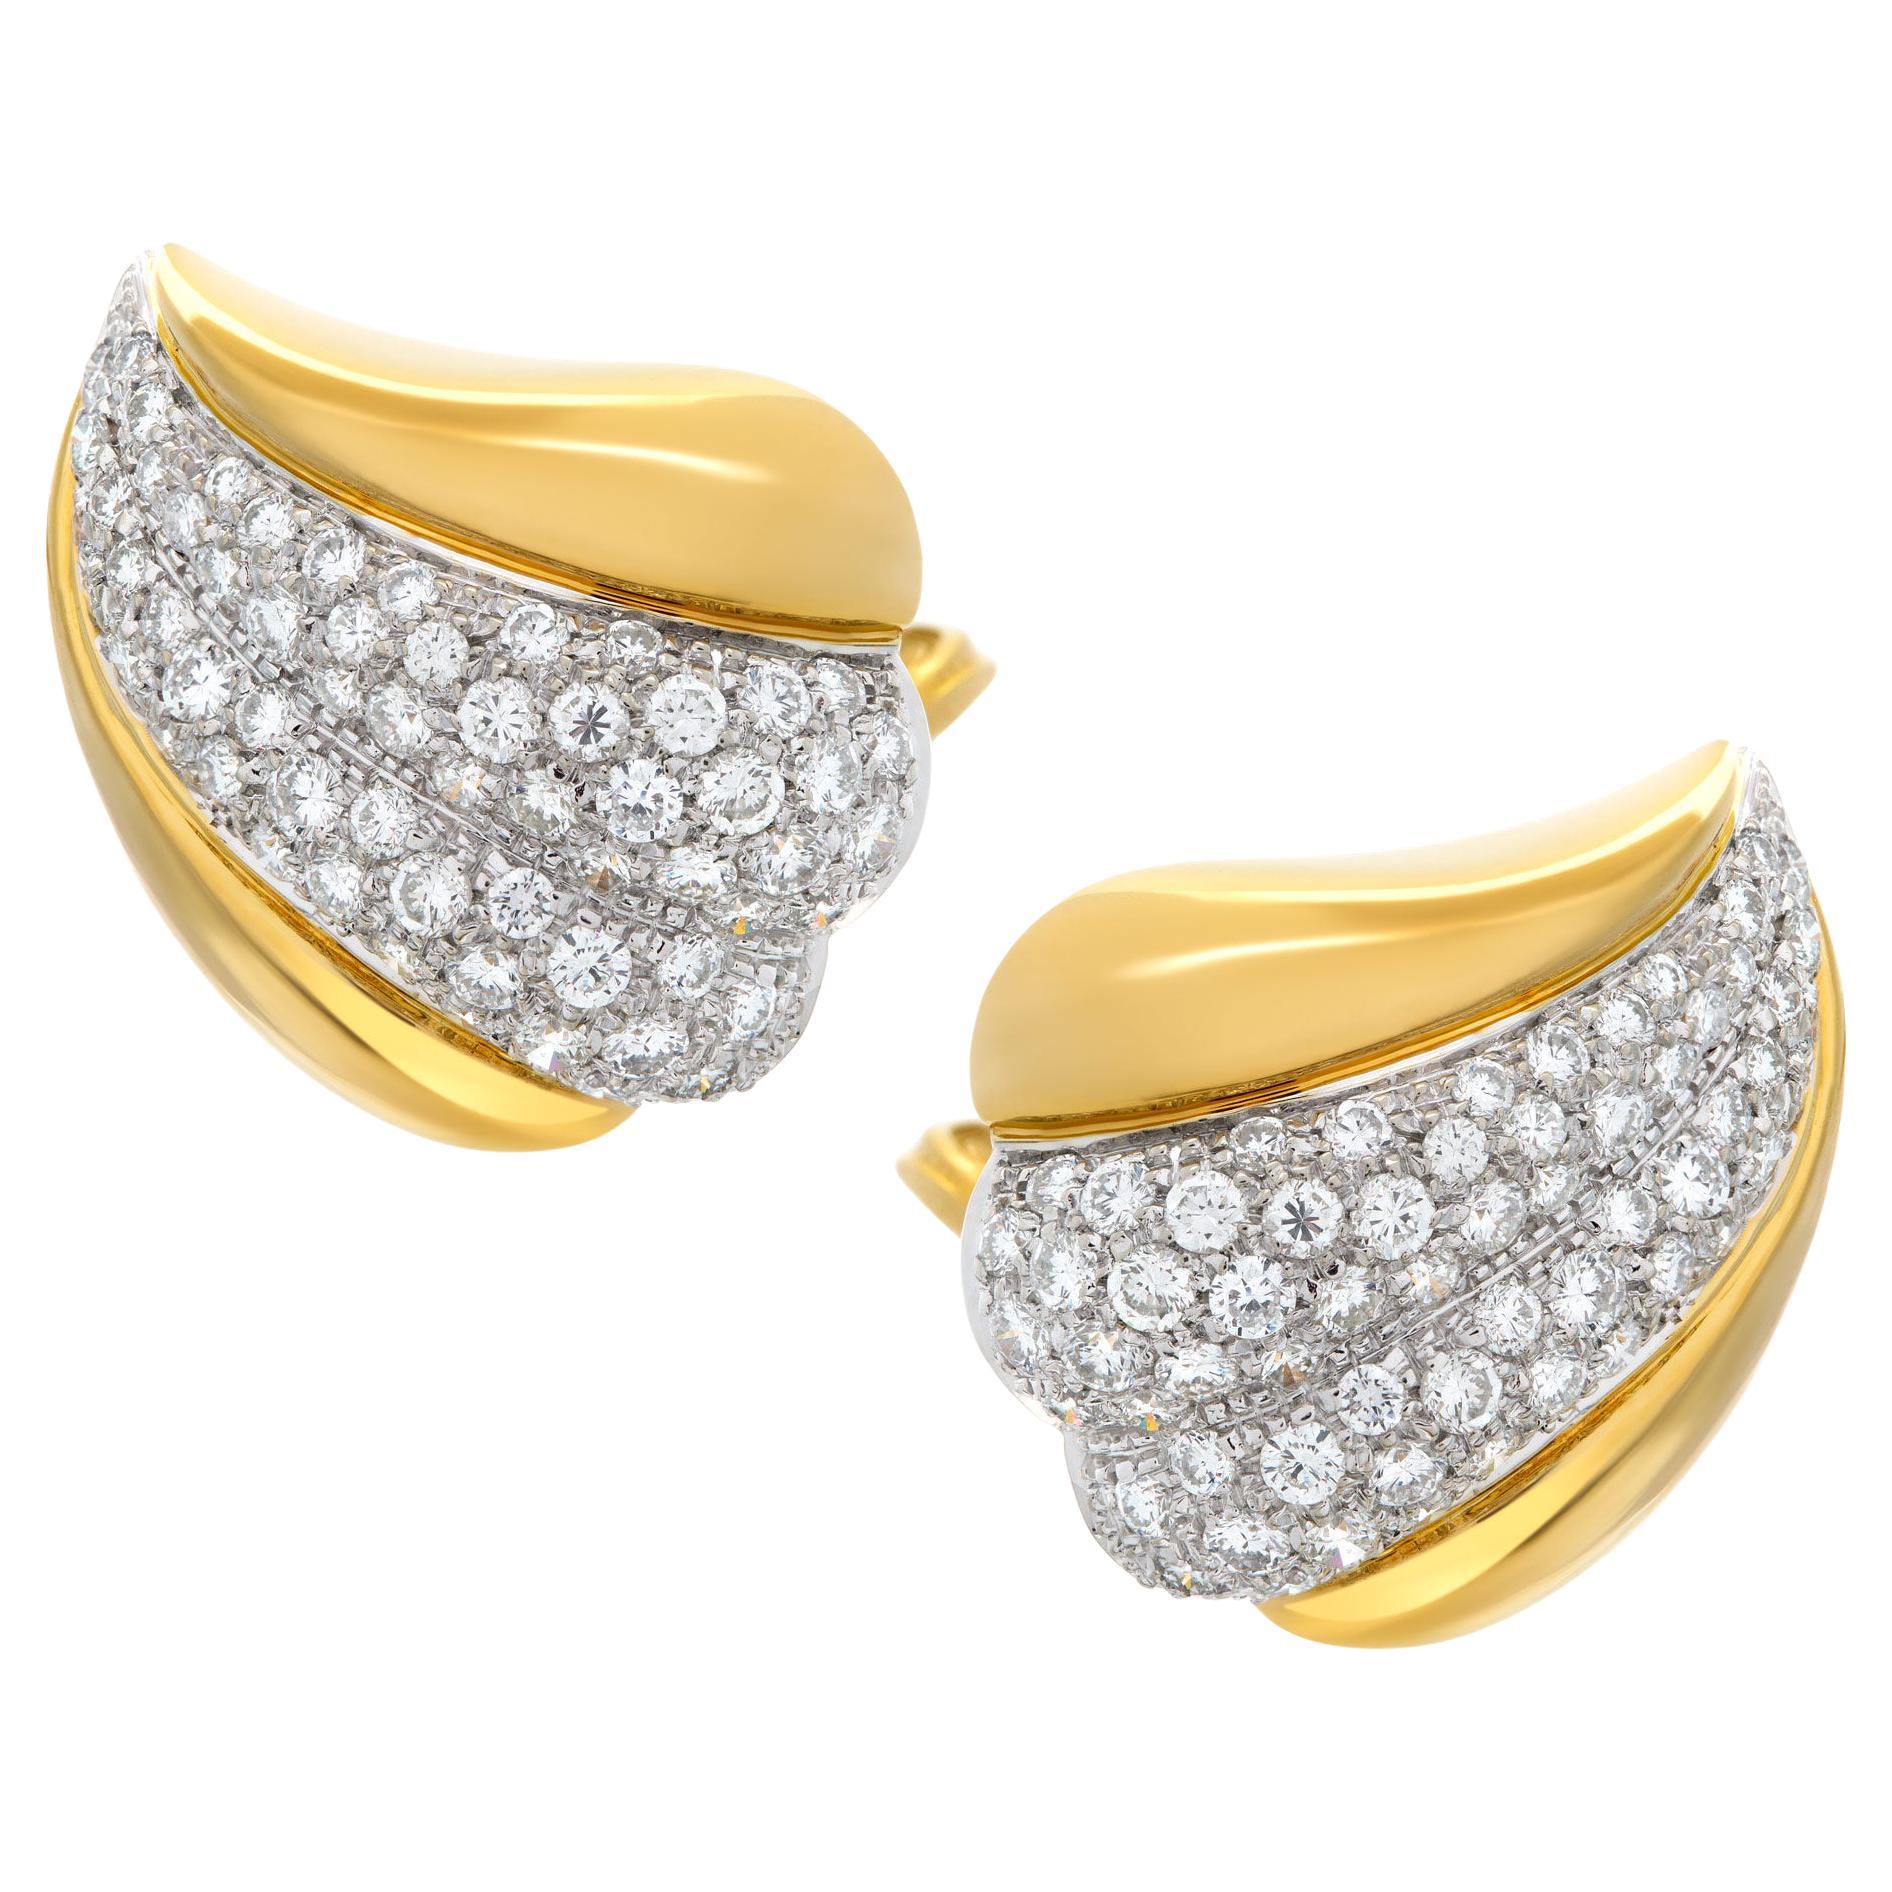 Diamond Earrings Set in 18k Yellow Gold with over 2.15 Carats in Diamonds